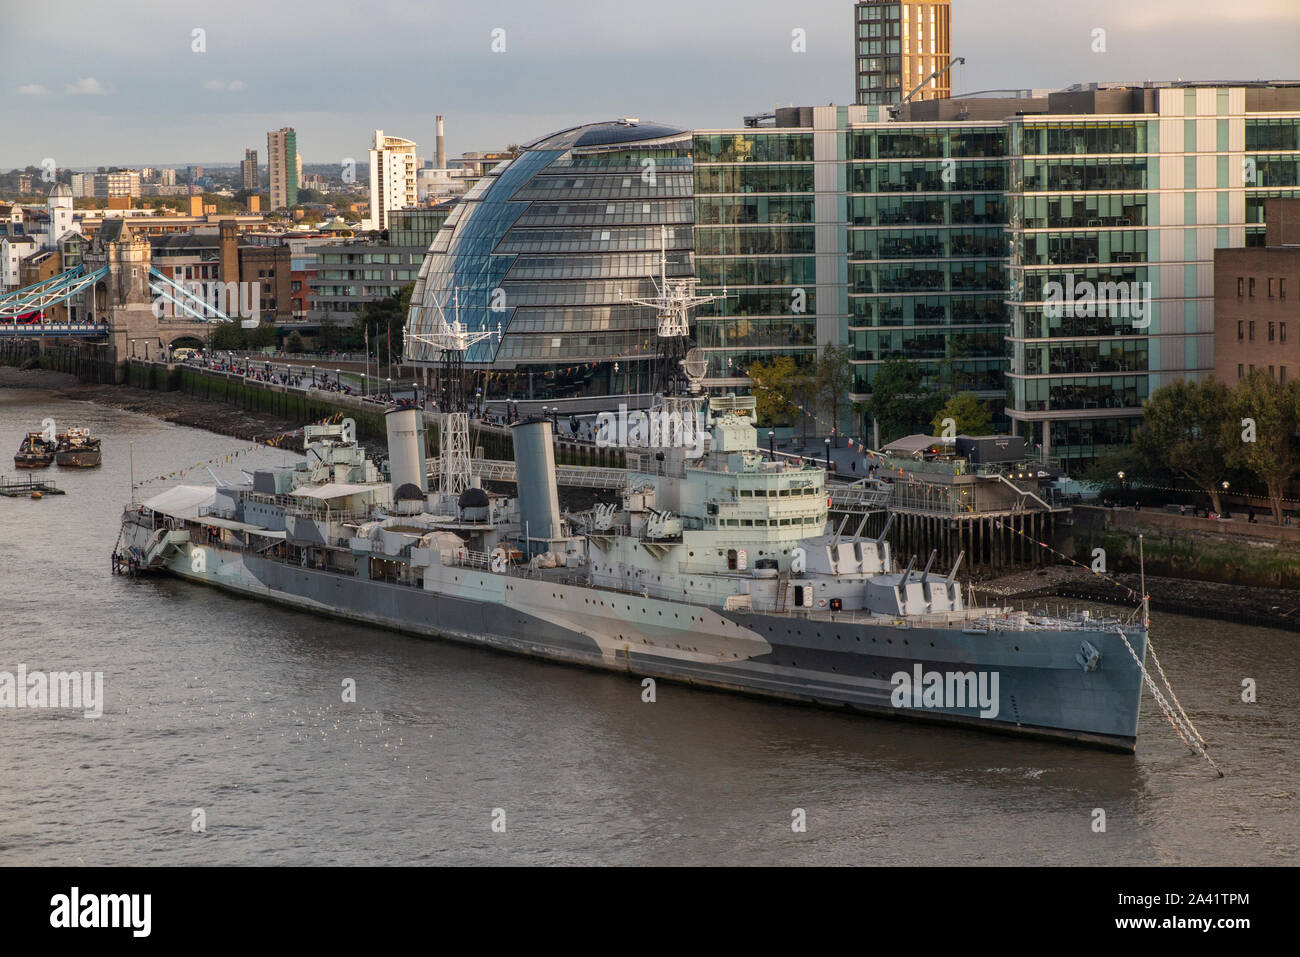 HMS Belfast on the River Thames, with the Mayor's Office (City Hall) in teh background Stock Photo